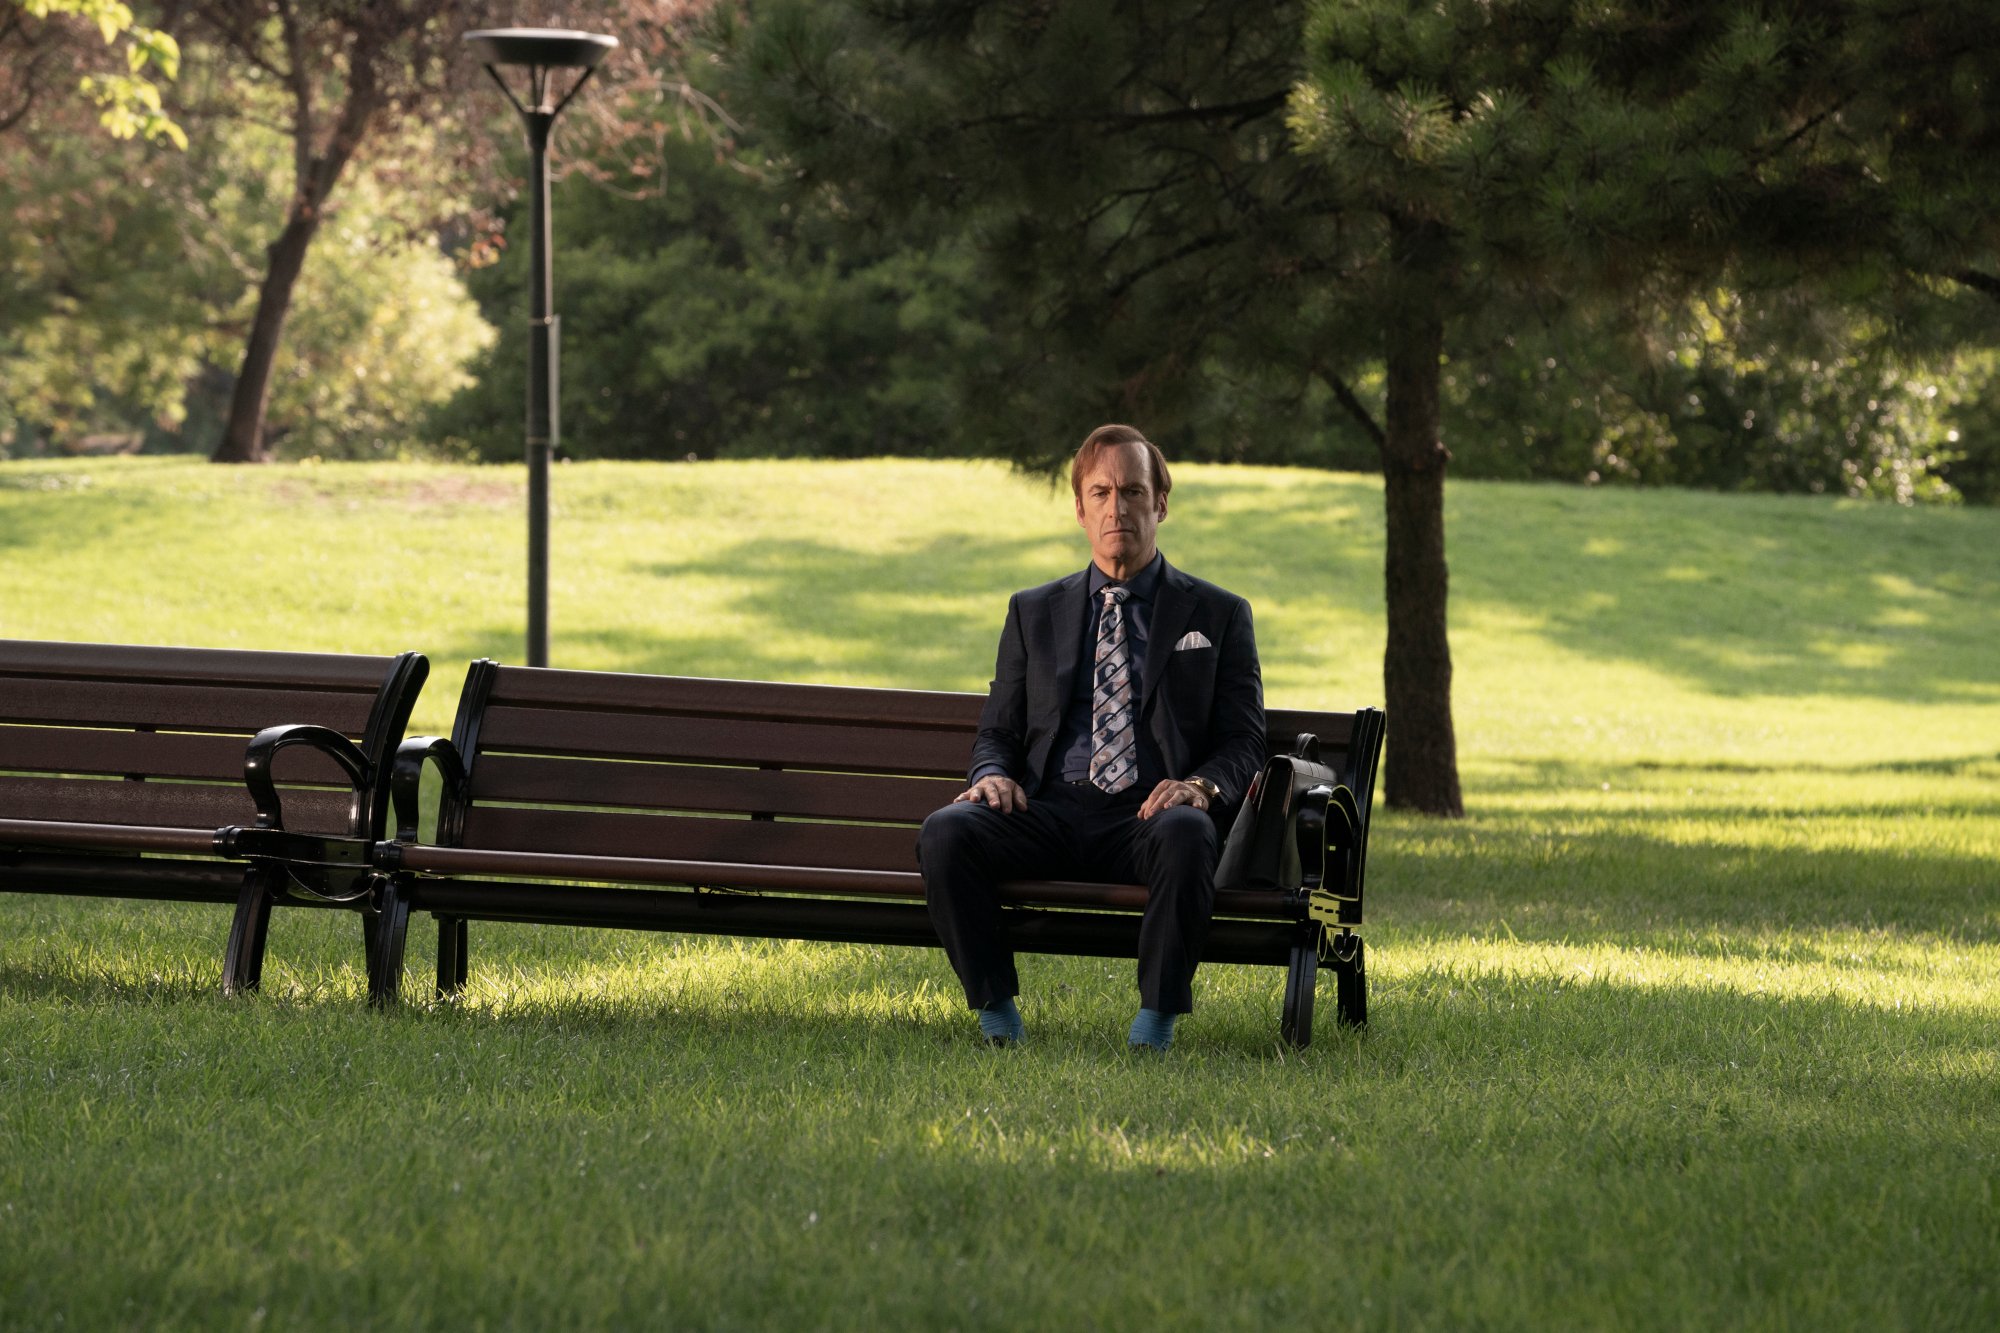 Bob Odenkirk as Saul Goodman/Jimmy McGill in 'Better Call Saul' Season 6 Episode 7, which is the final chapter's mid-season finale. He's sitting on a bench in a park, with grass and trees everywhere.